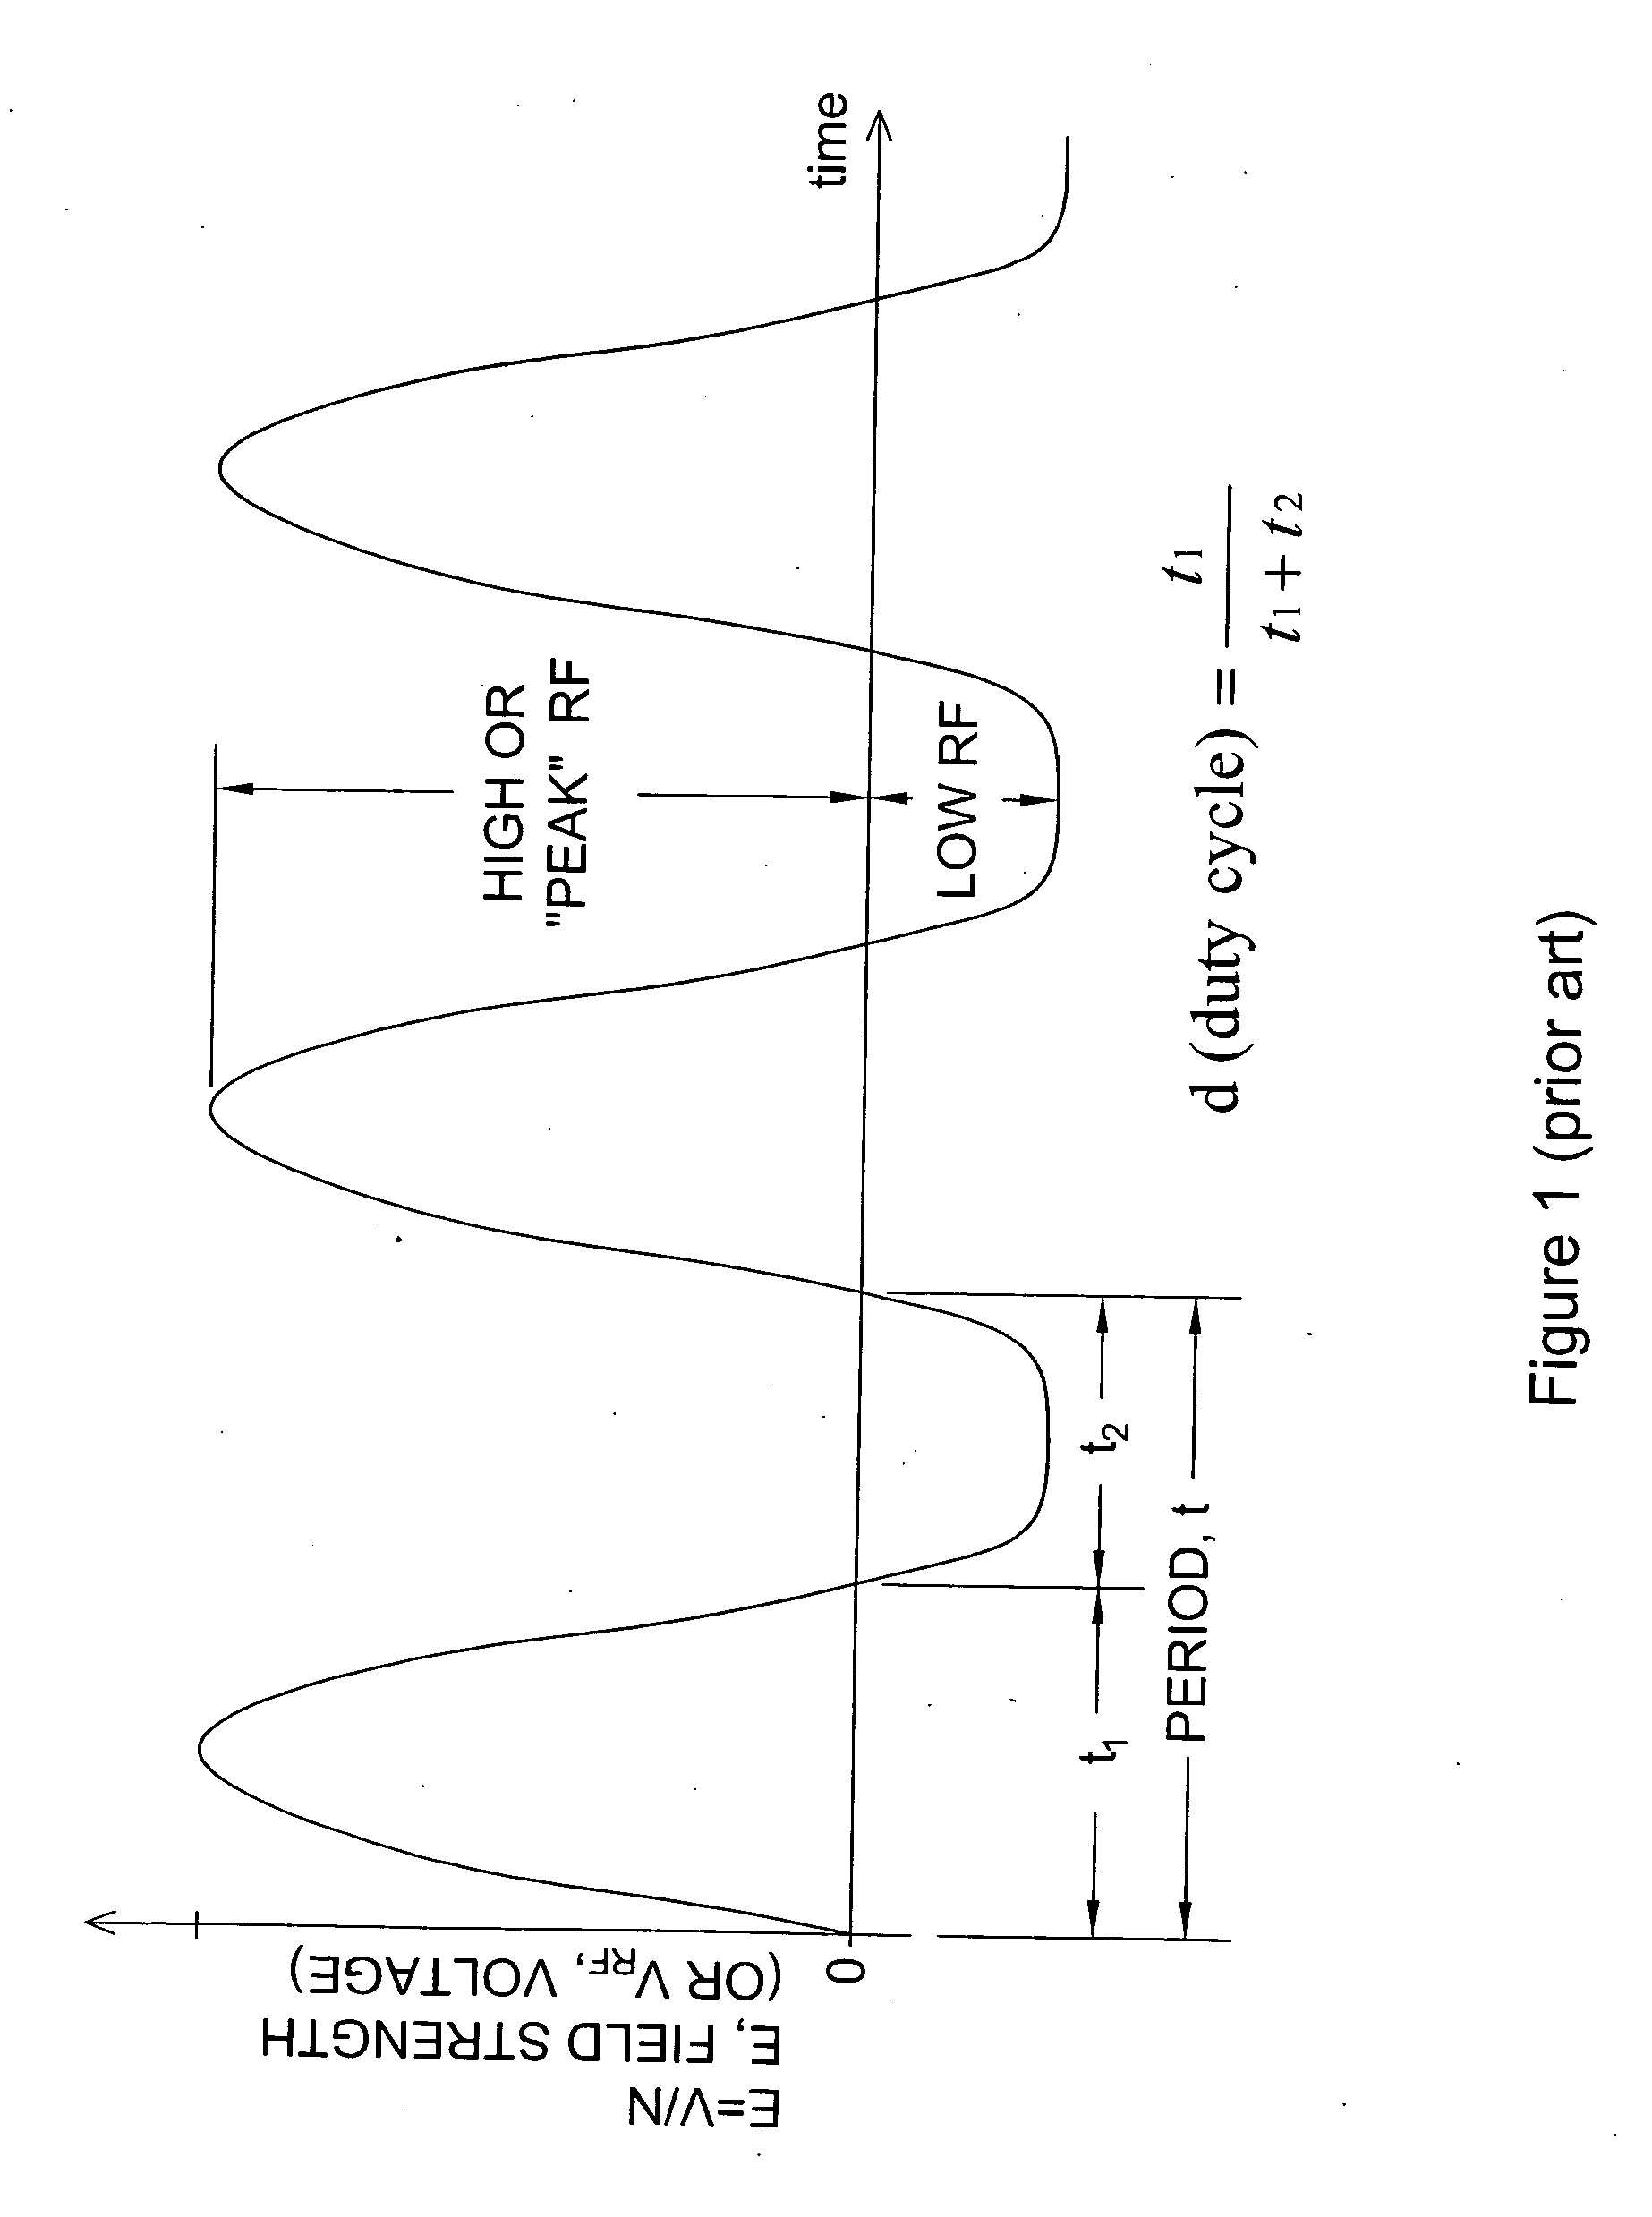 Method and apparatus for enhanced ion mobility based sample analysis using various analyzer configurations